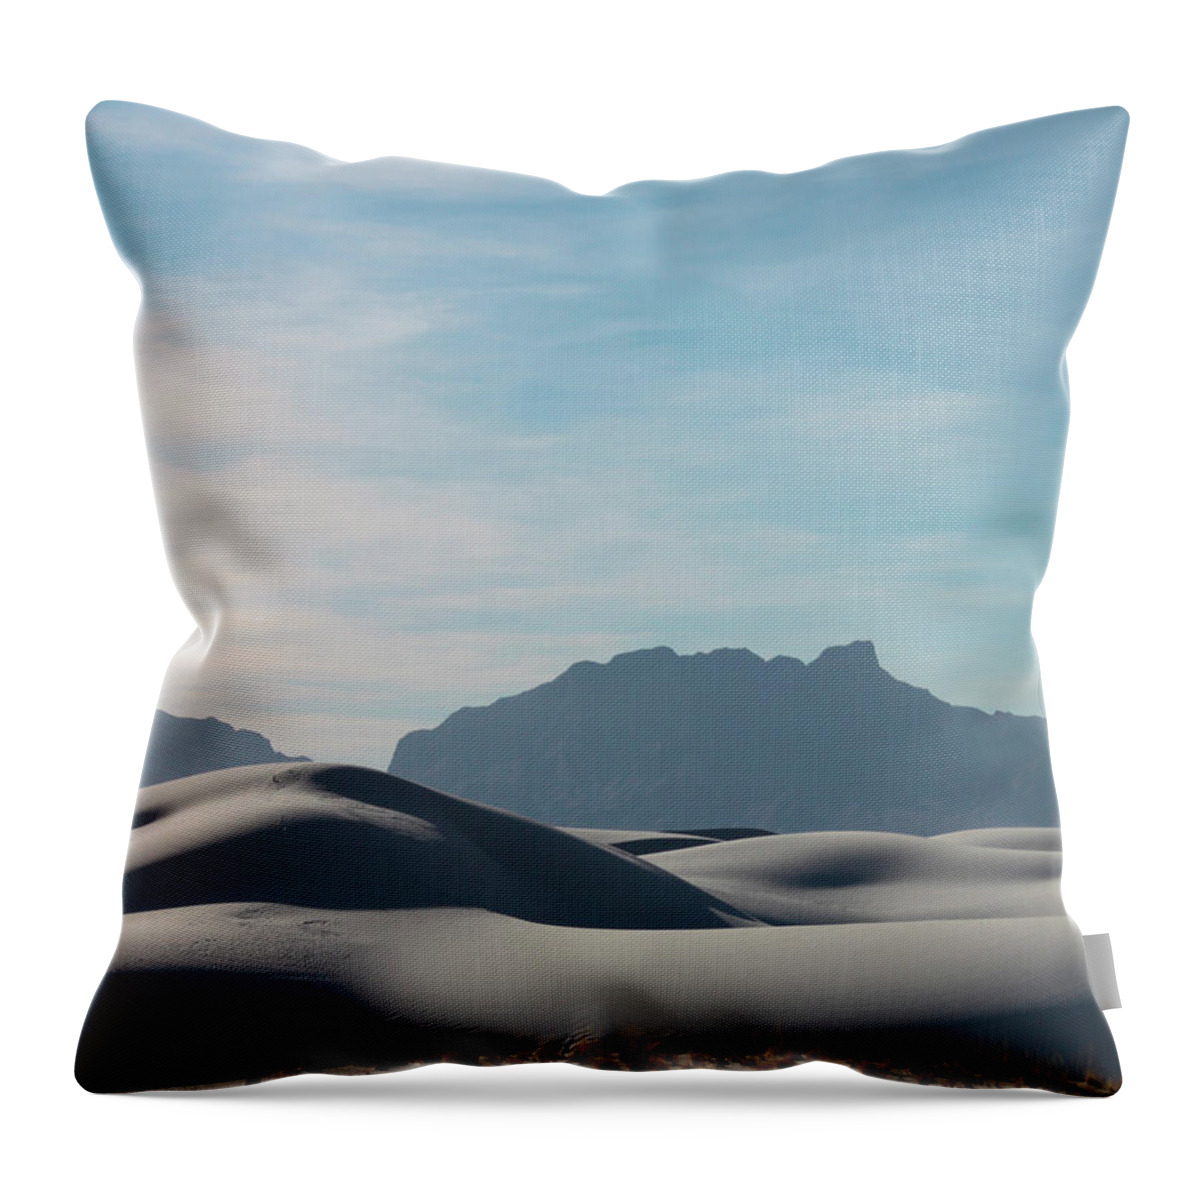 White Sands National Monument Throw Pillow featuring the painting White Sands Natural Anatomy by Jack Pumphrey